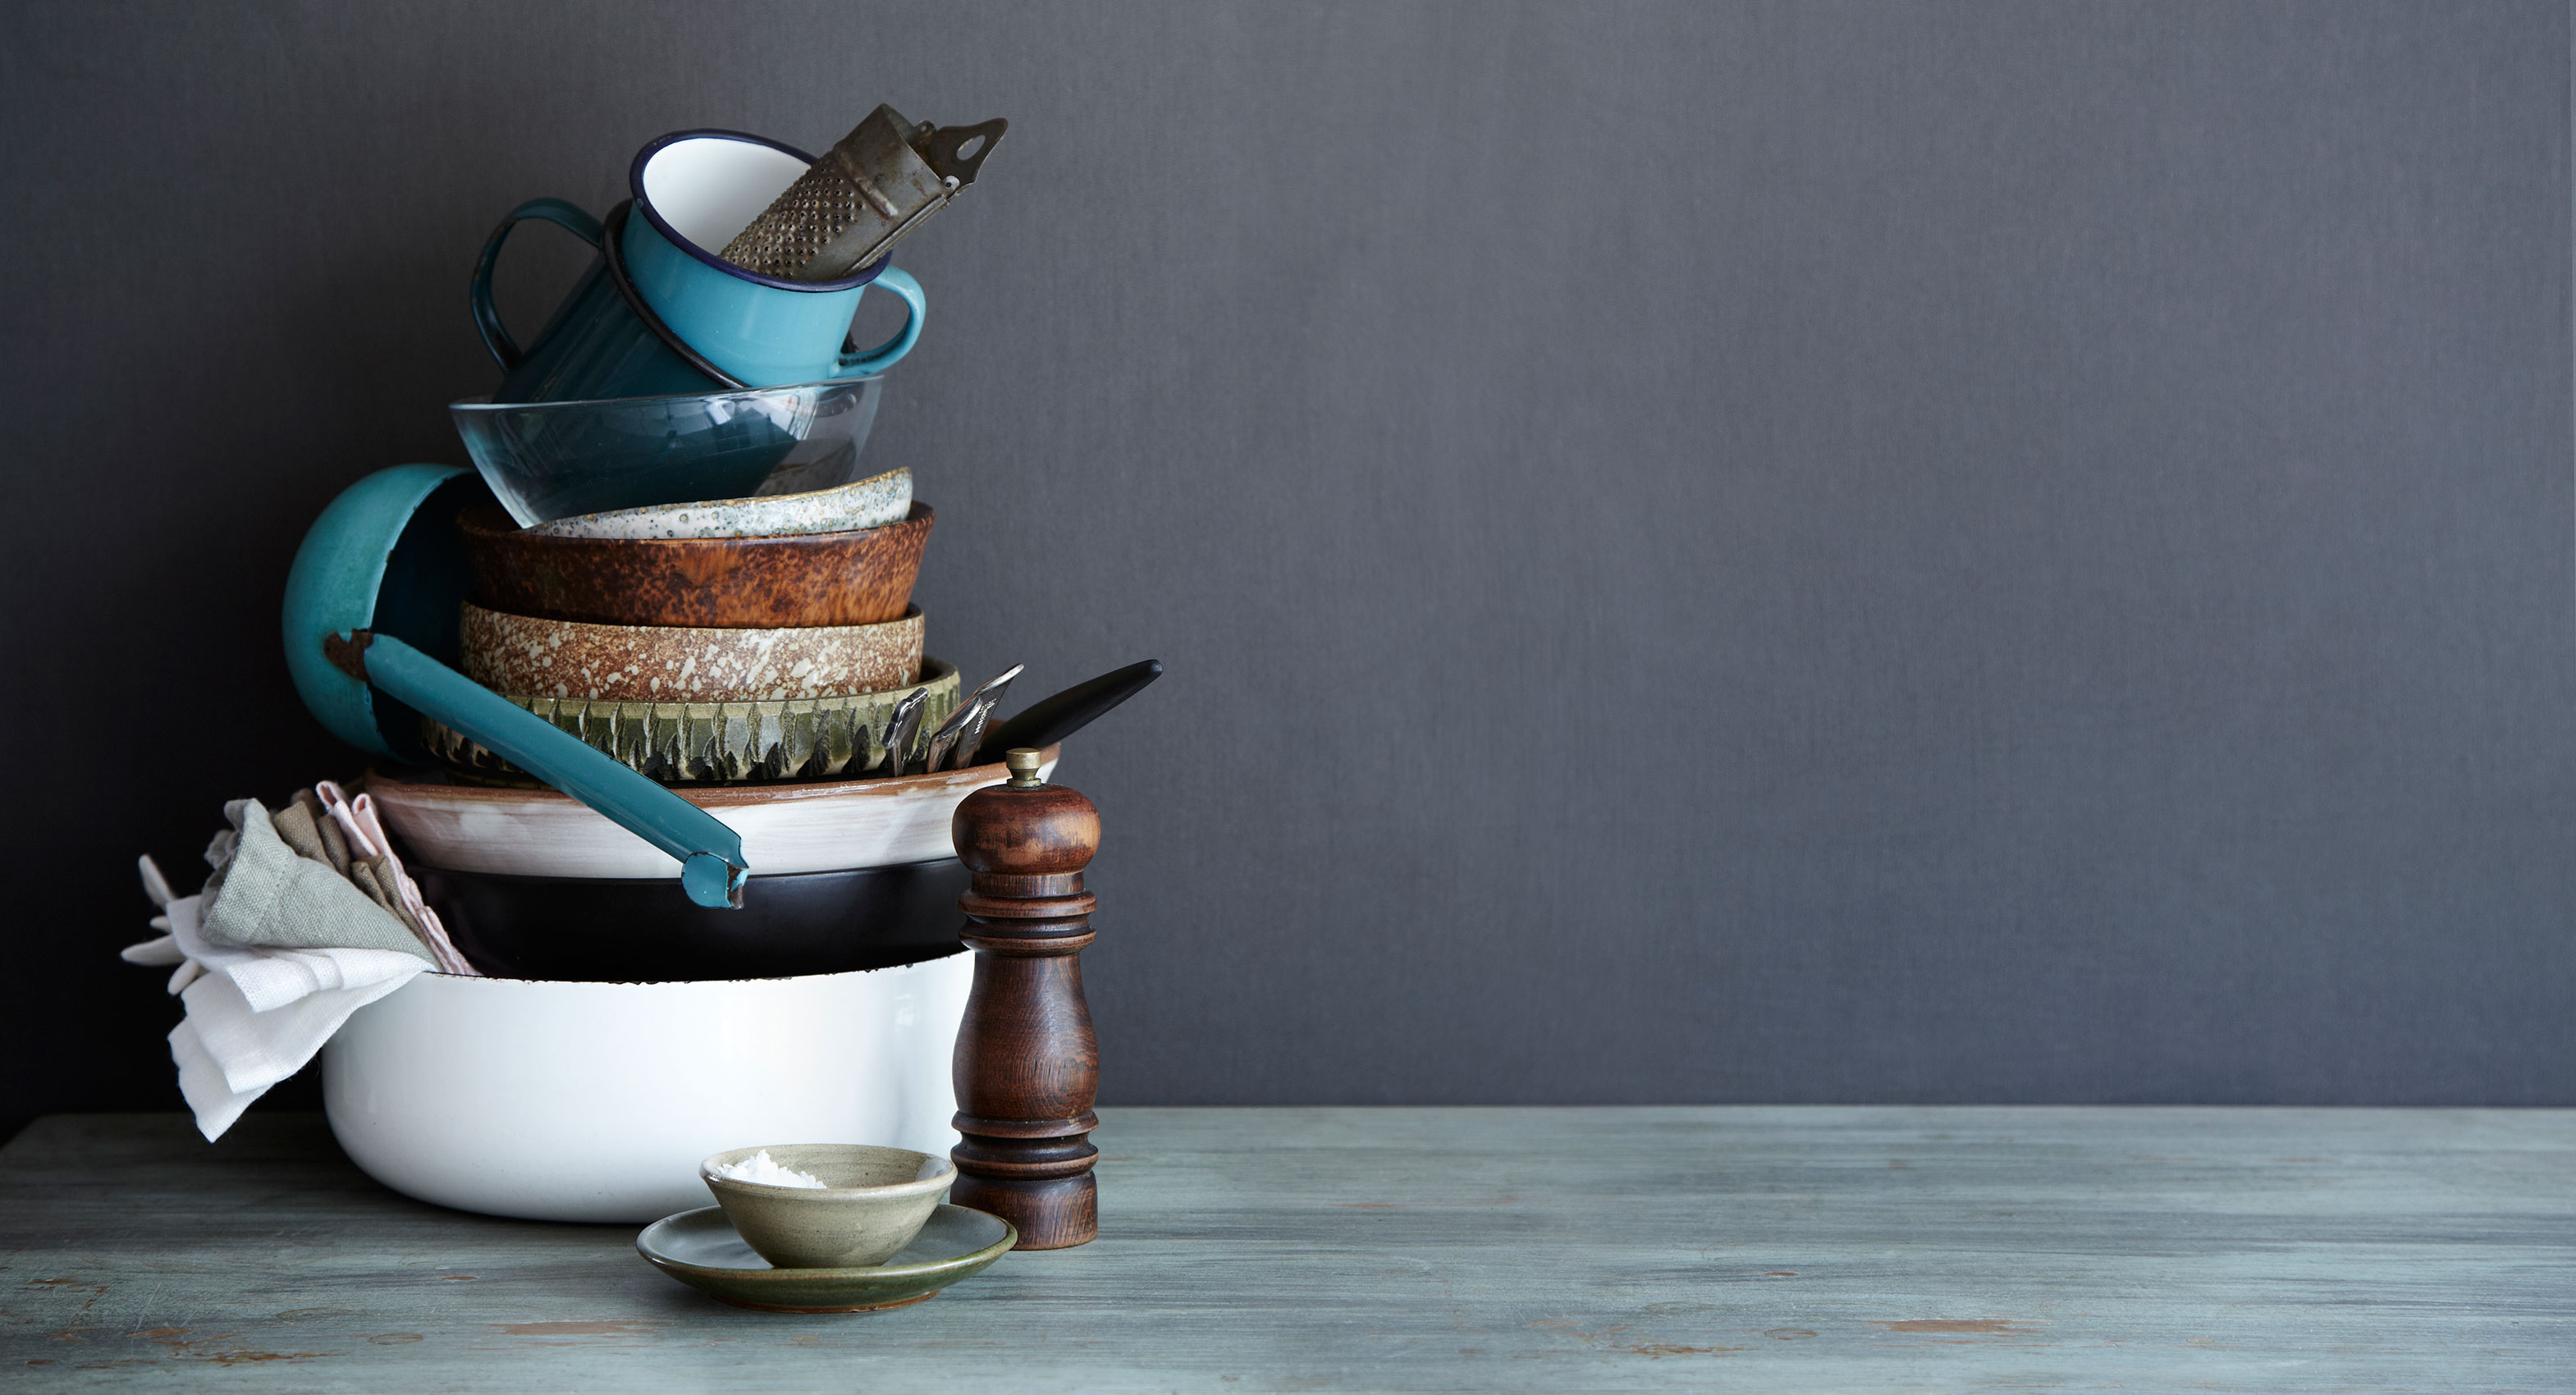 Everyday • Rustic Ceramic & Enamel Stacked Soup Bowls on Dark Wooden Bench • Hospitality & Editorial Food Photography